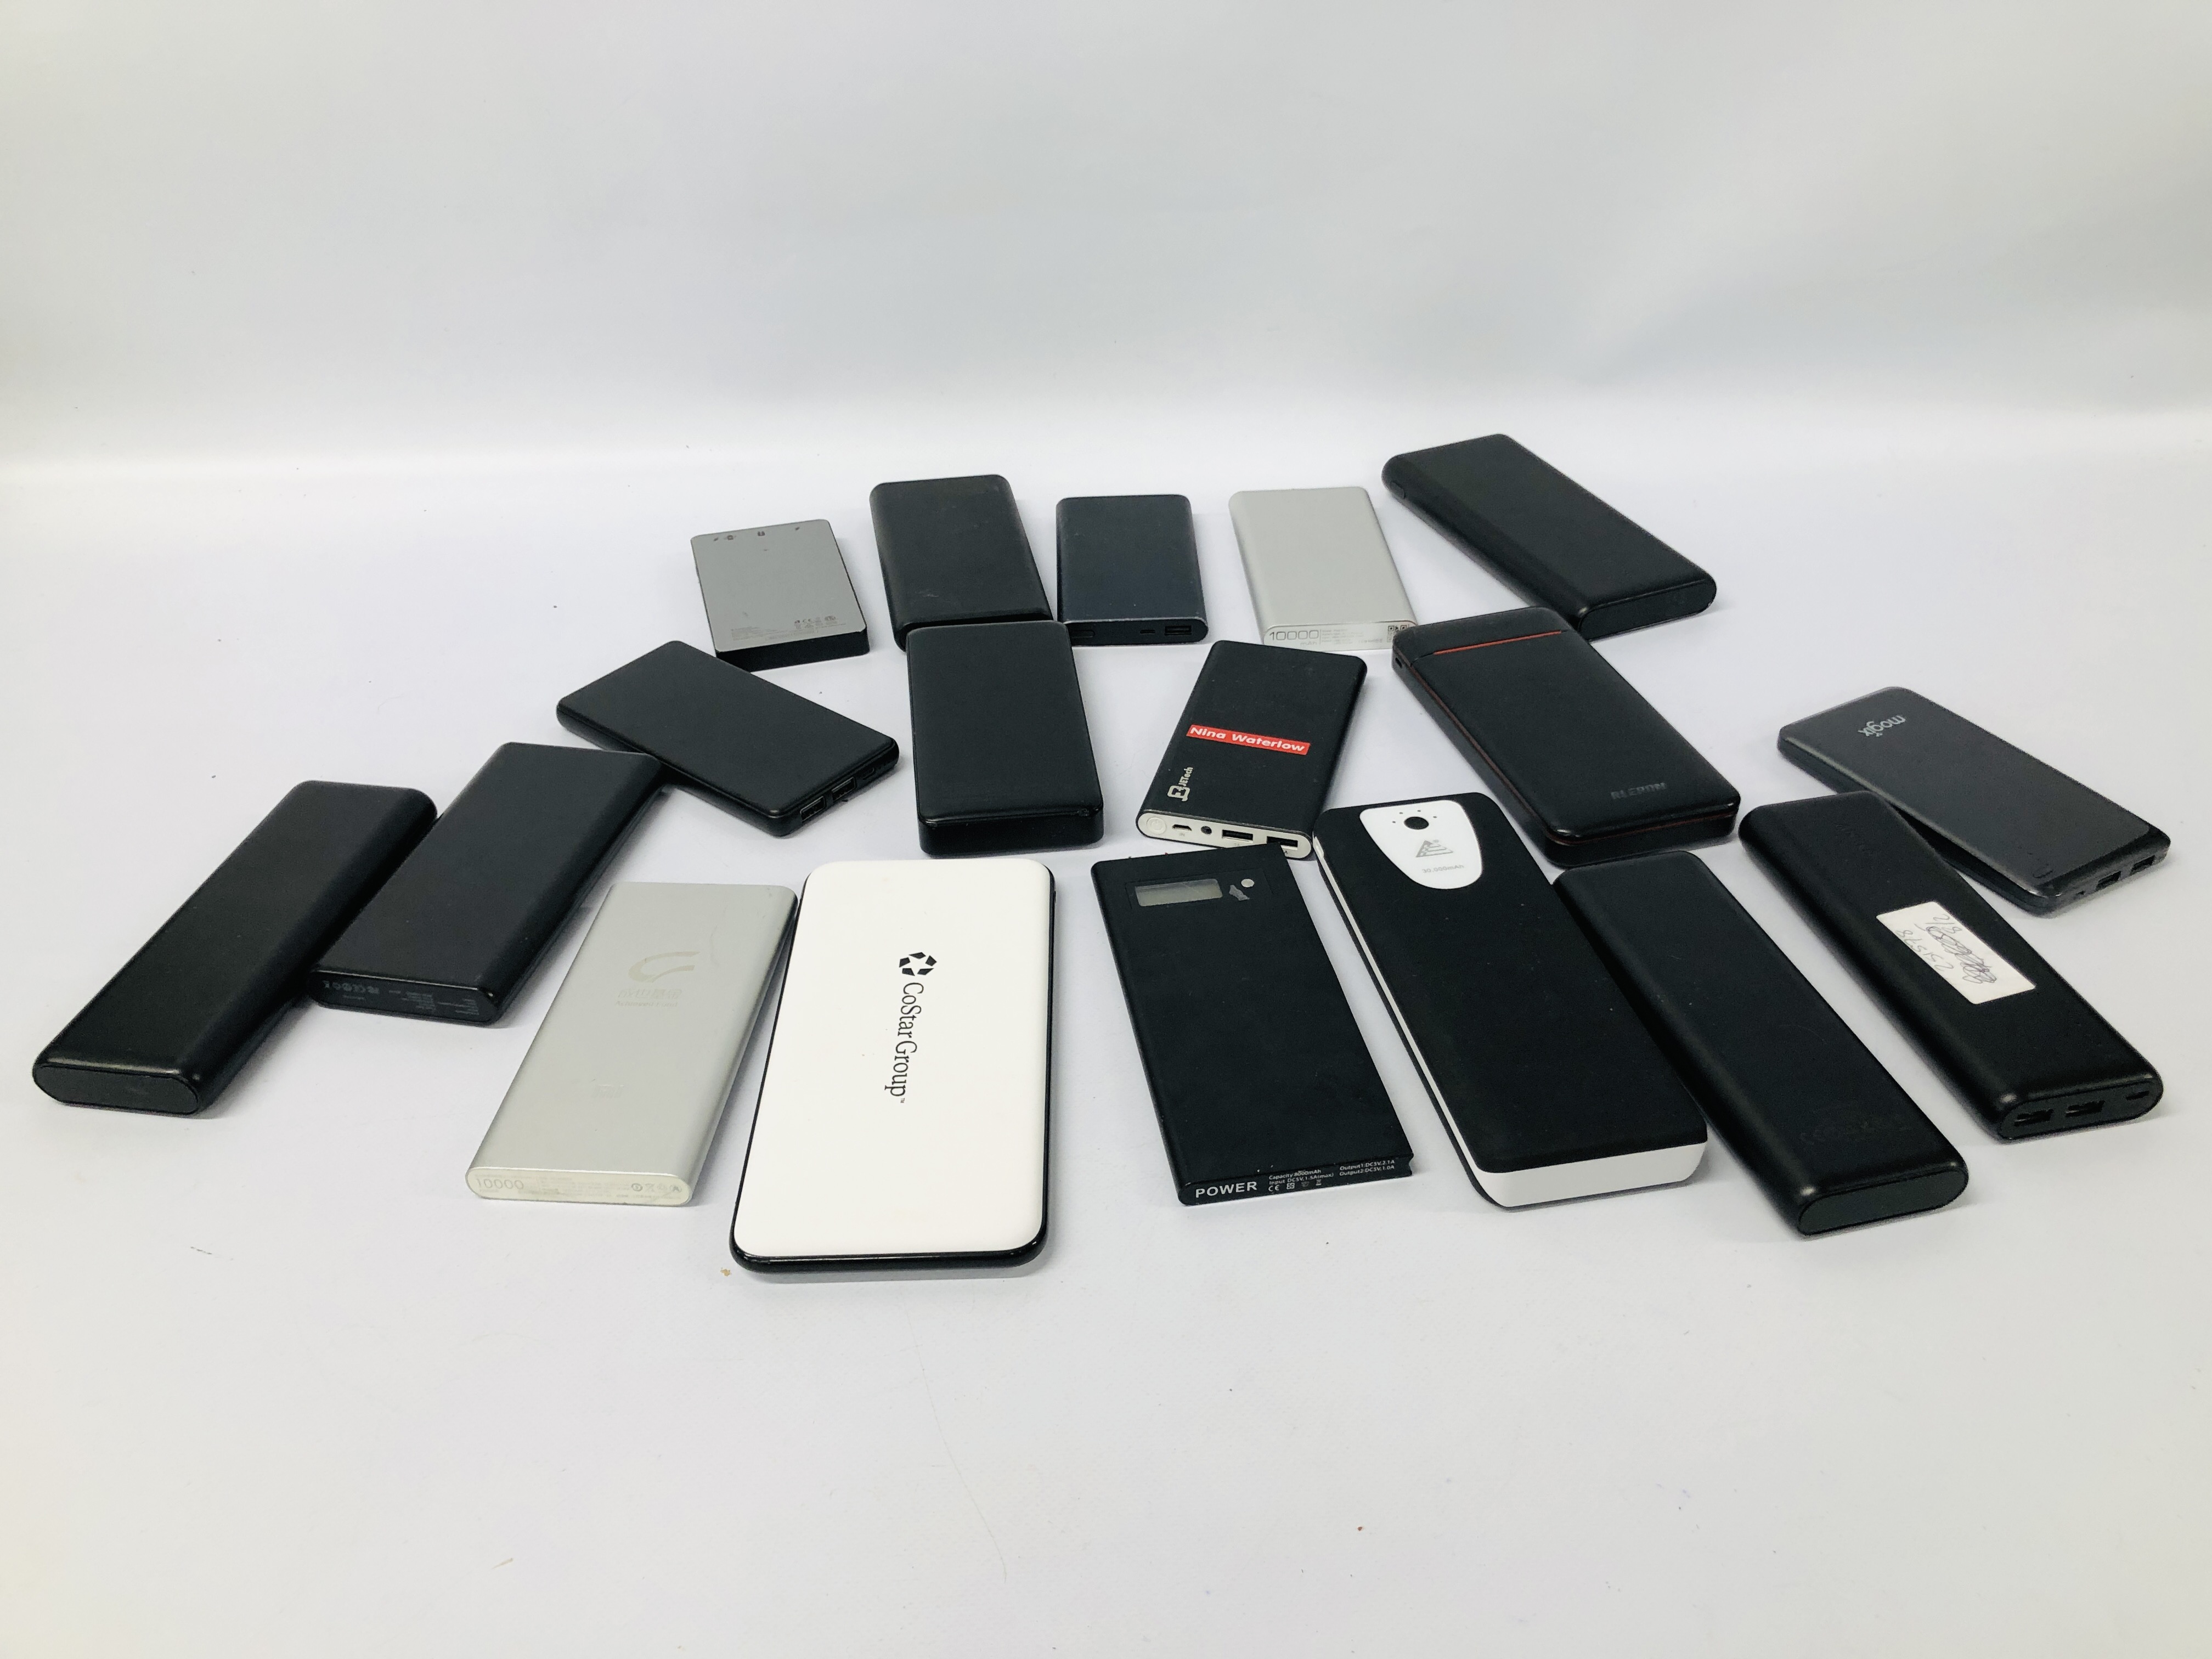 A BOX CONTAINING 18 X VARIOUS POWERBANK BATTERY BACKUPS TO INCLUDE ANKER POWERCORE,